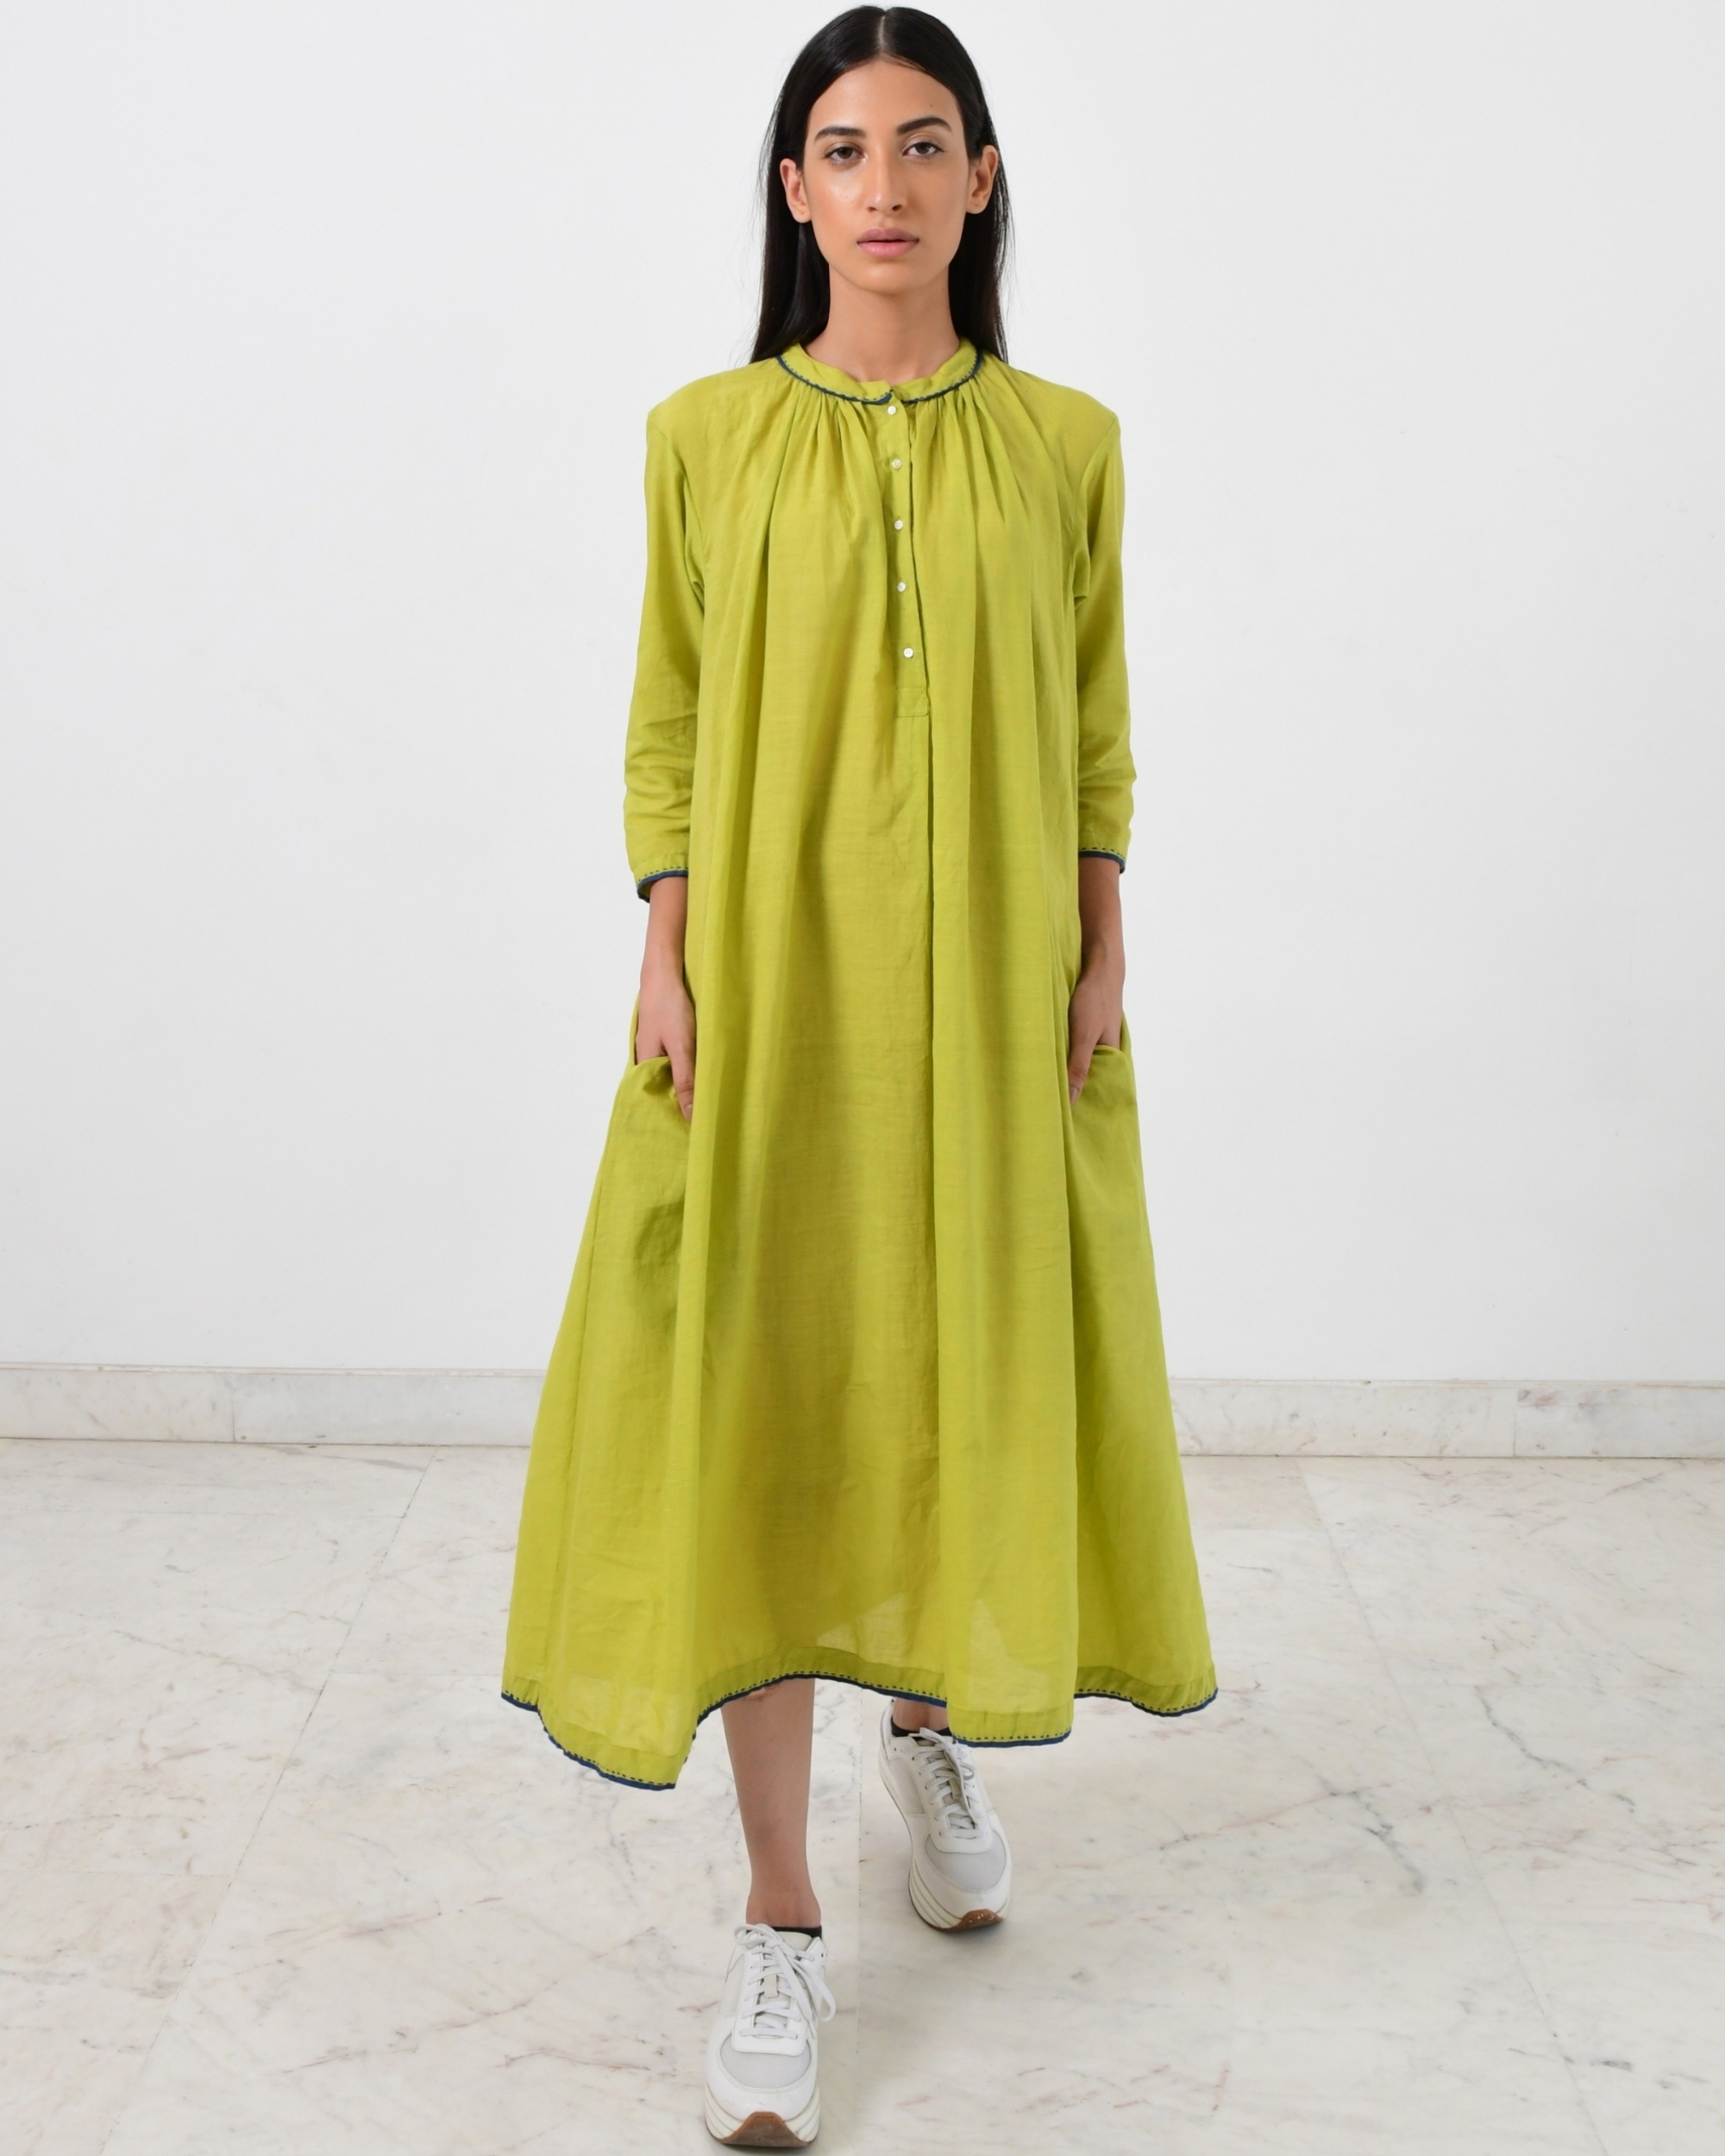 Green paneled cotton dress with pockets by Rias | The Secret Label